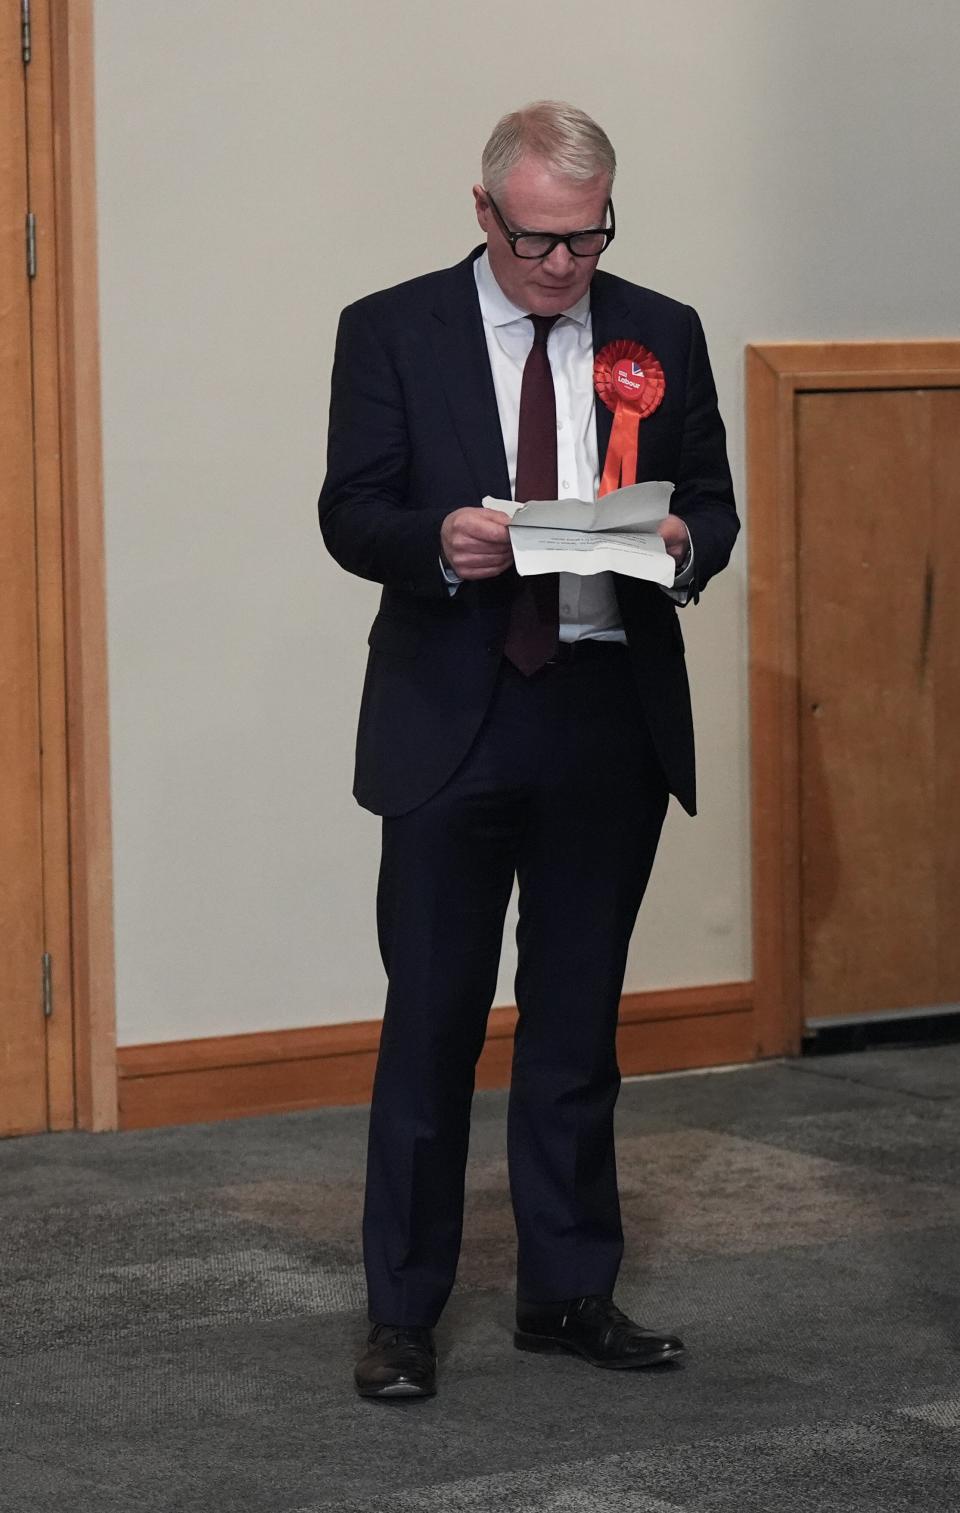 Labour's Richard Parker checks his speech before he is declared as the new Mayor of West Midlands (Jacob King/PA Wire)